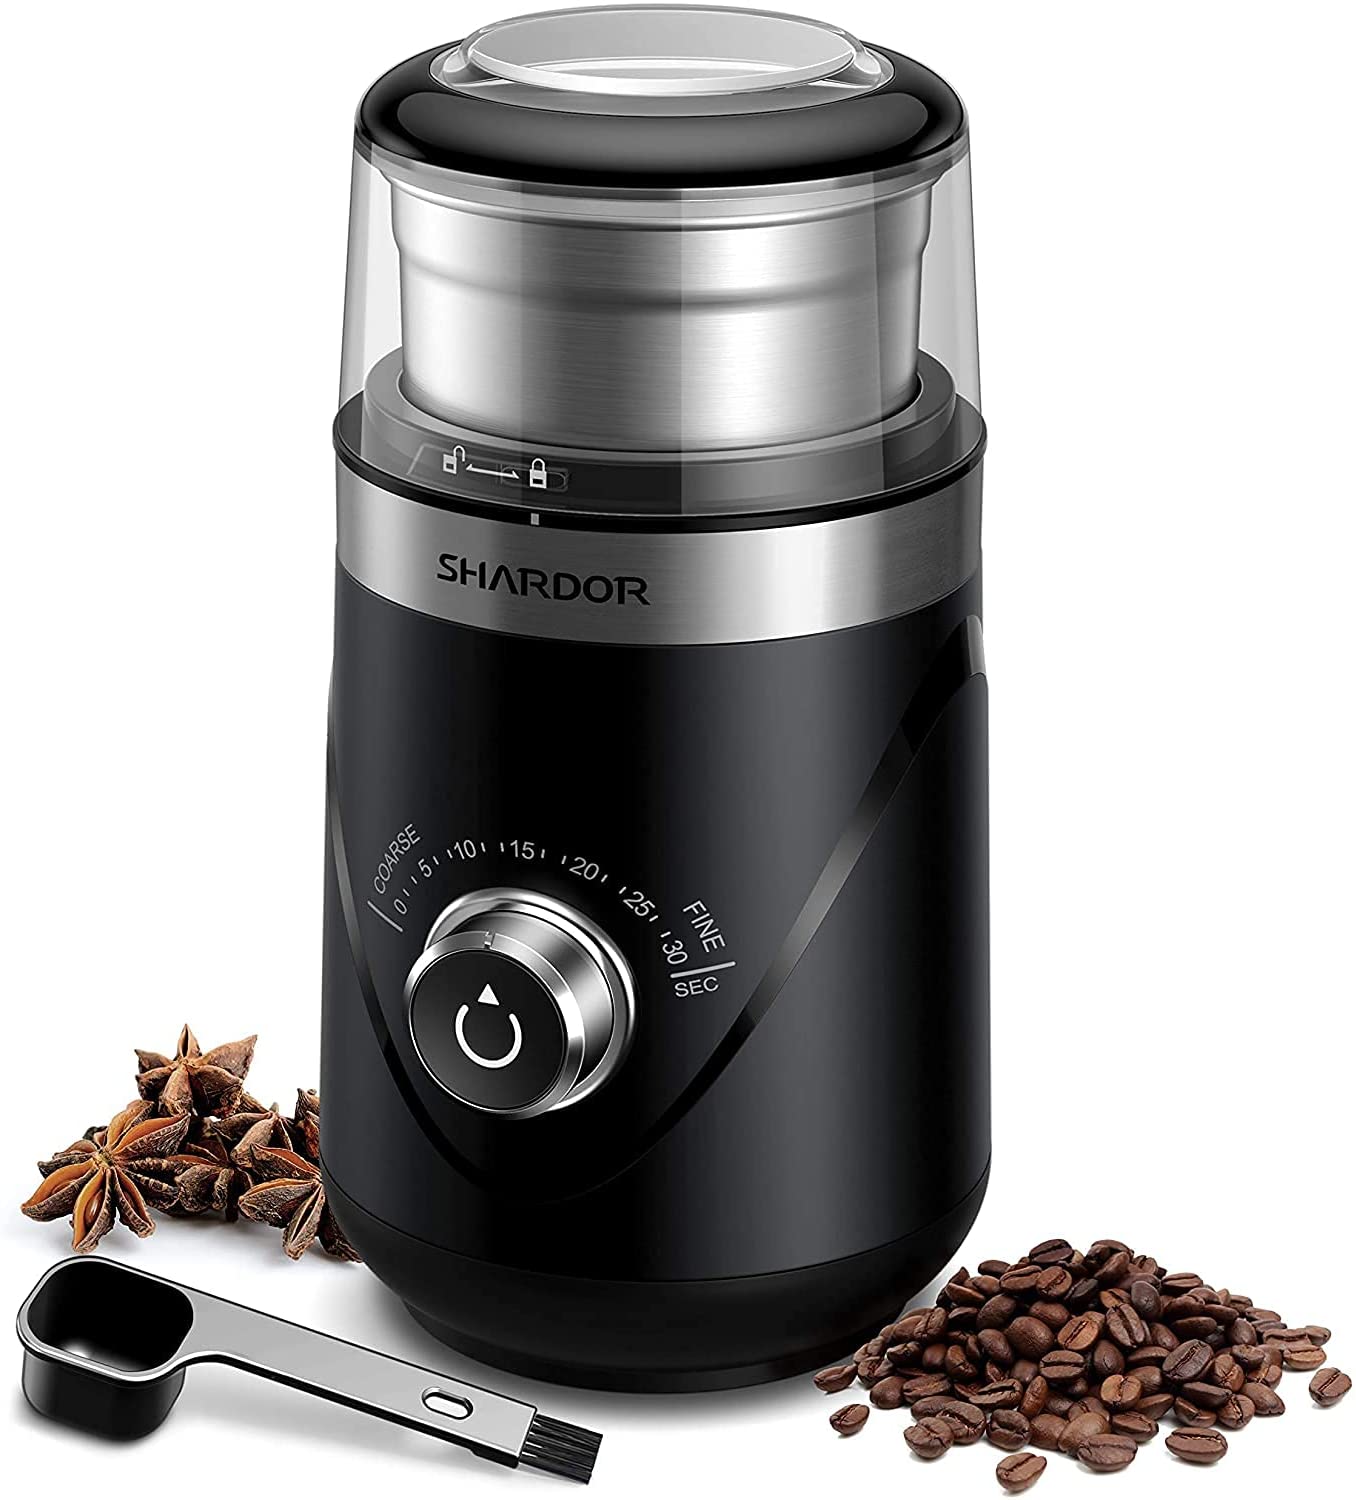 SHARDOR Coffee Grinder, Electric Spice Mill, Quiet, Precise, Adjustable Grinding Level, Coffee Grinders, Stainless Steel Knife for Coffee Beans, Nuts, Spices, Cereals, Herbs, Sugar Mill, 80 g, Removable